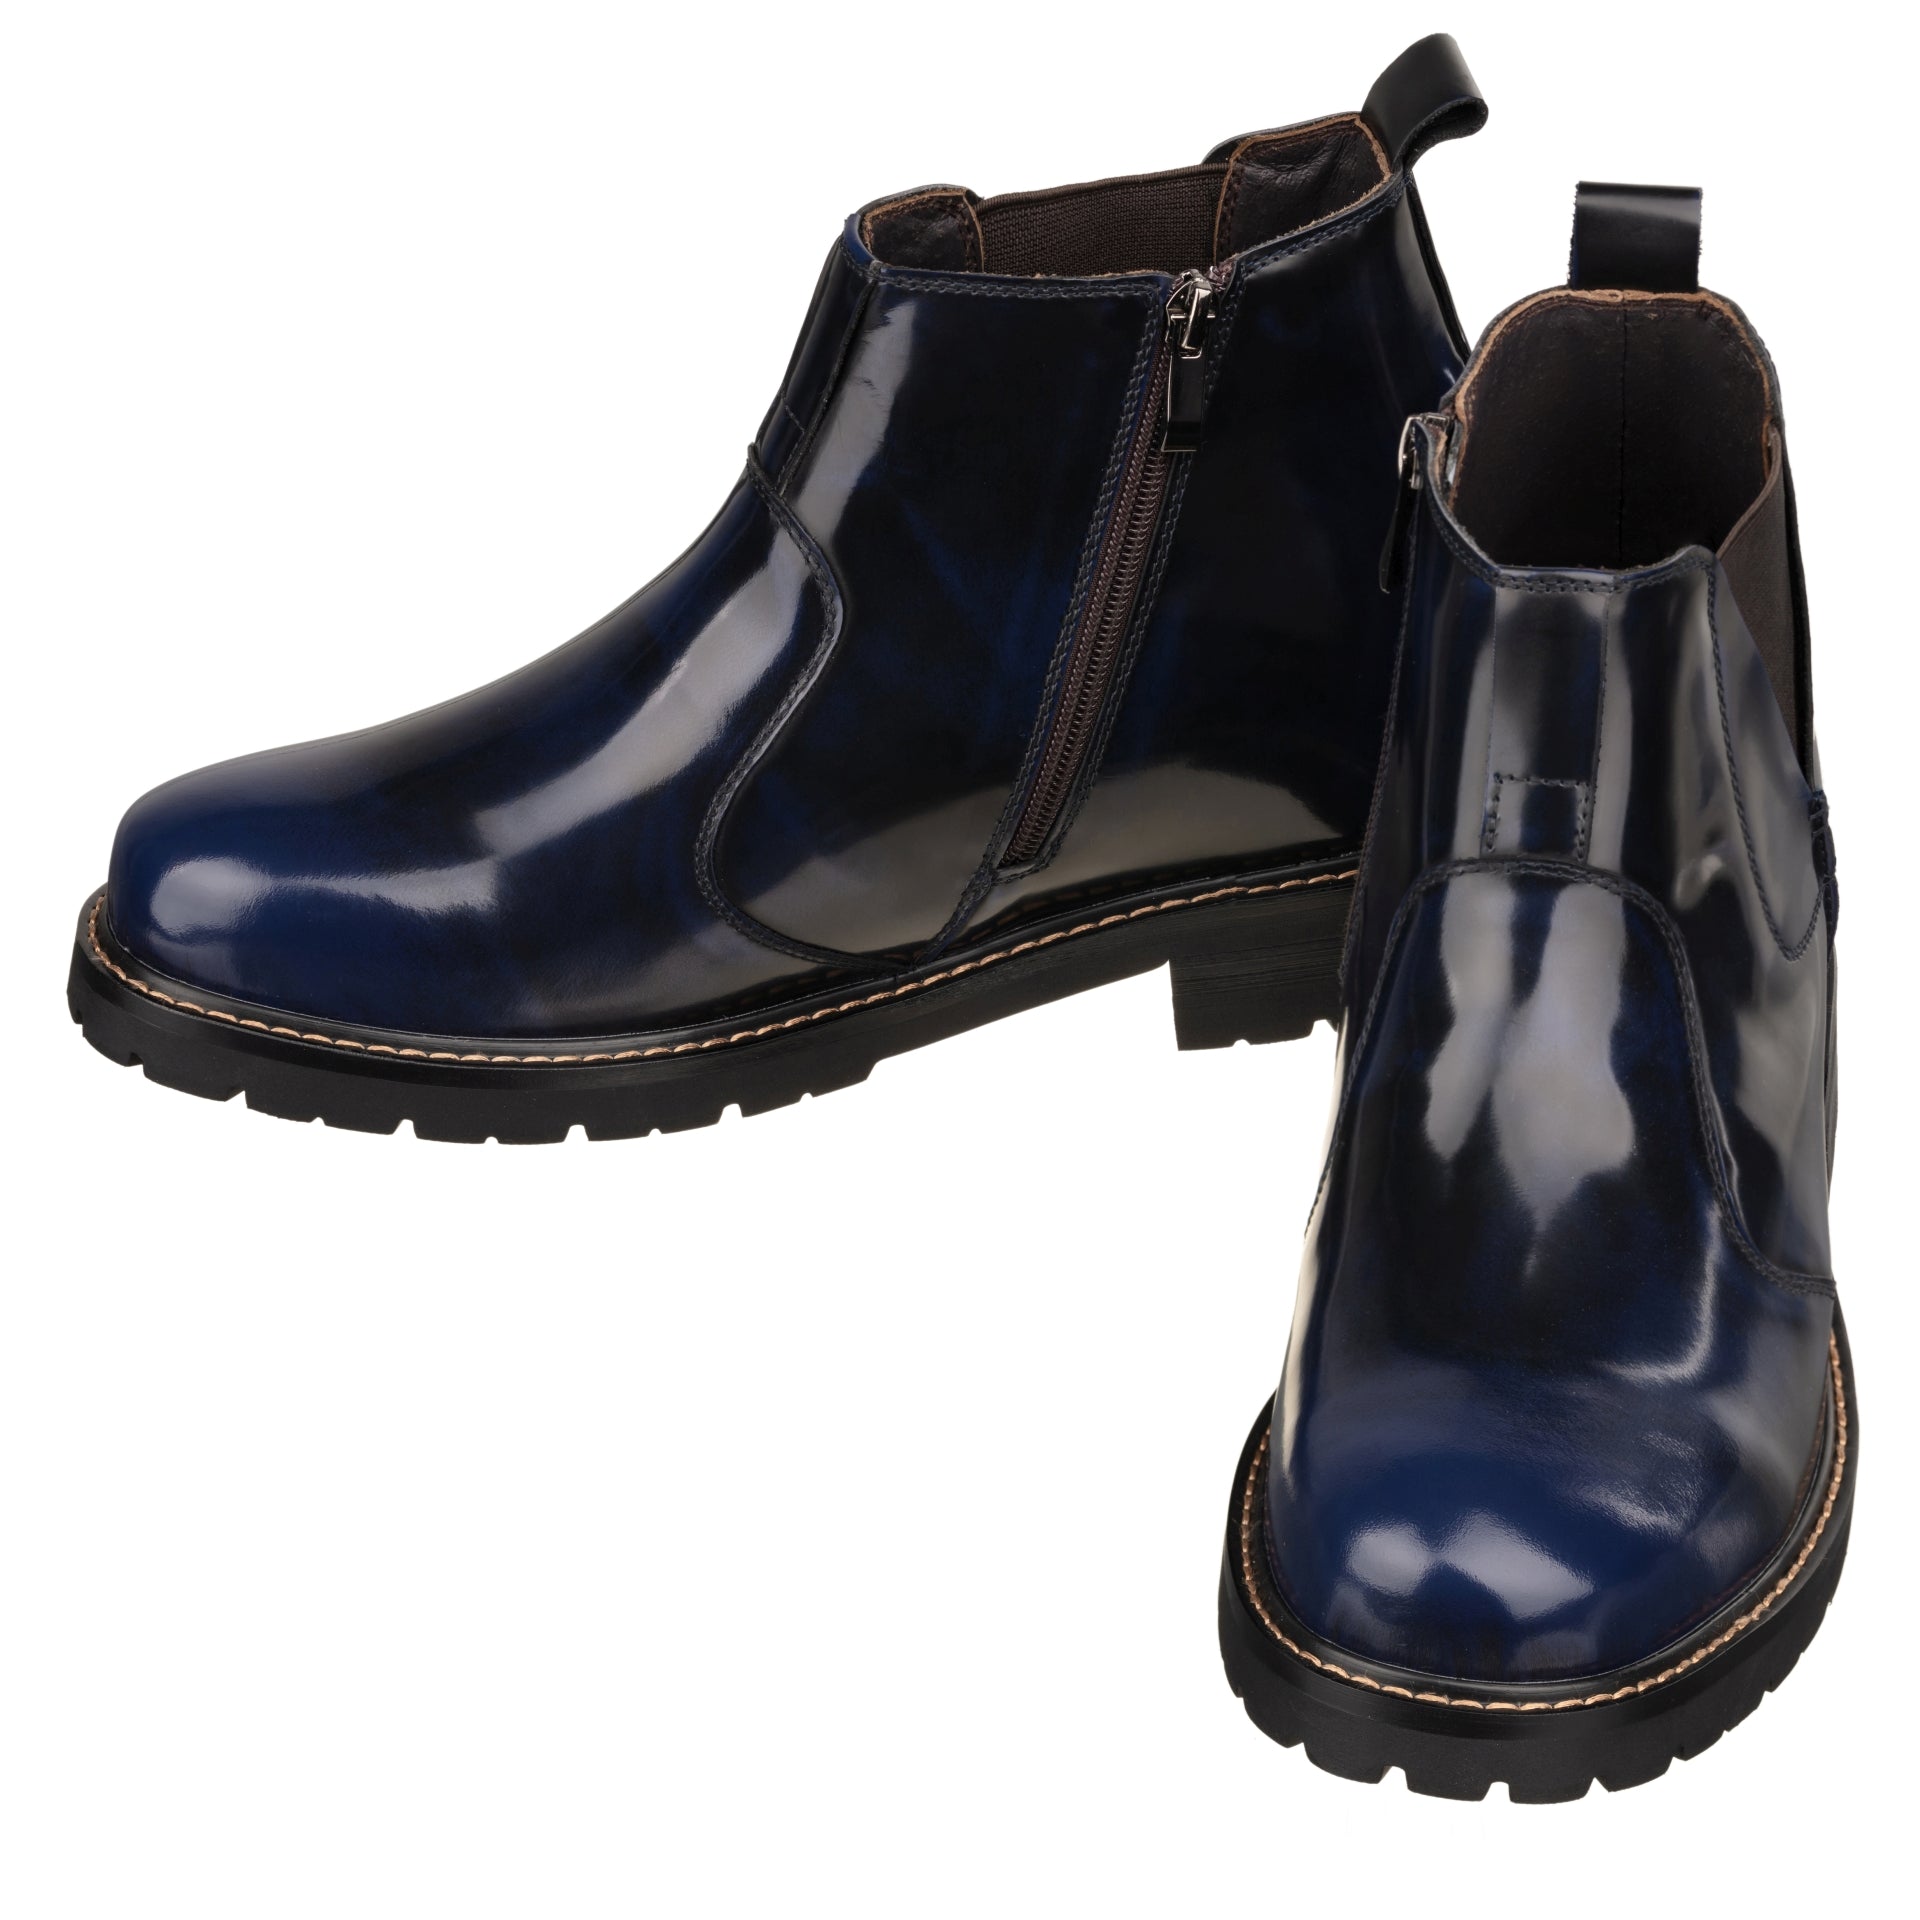 Elevator shoes height increase CALTO - K8993 - 3.6 Inches Taller (Dark Blue) - Patent Leather Boot